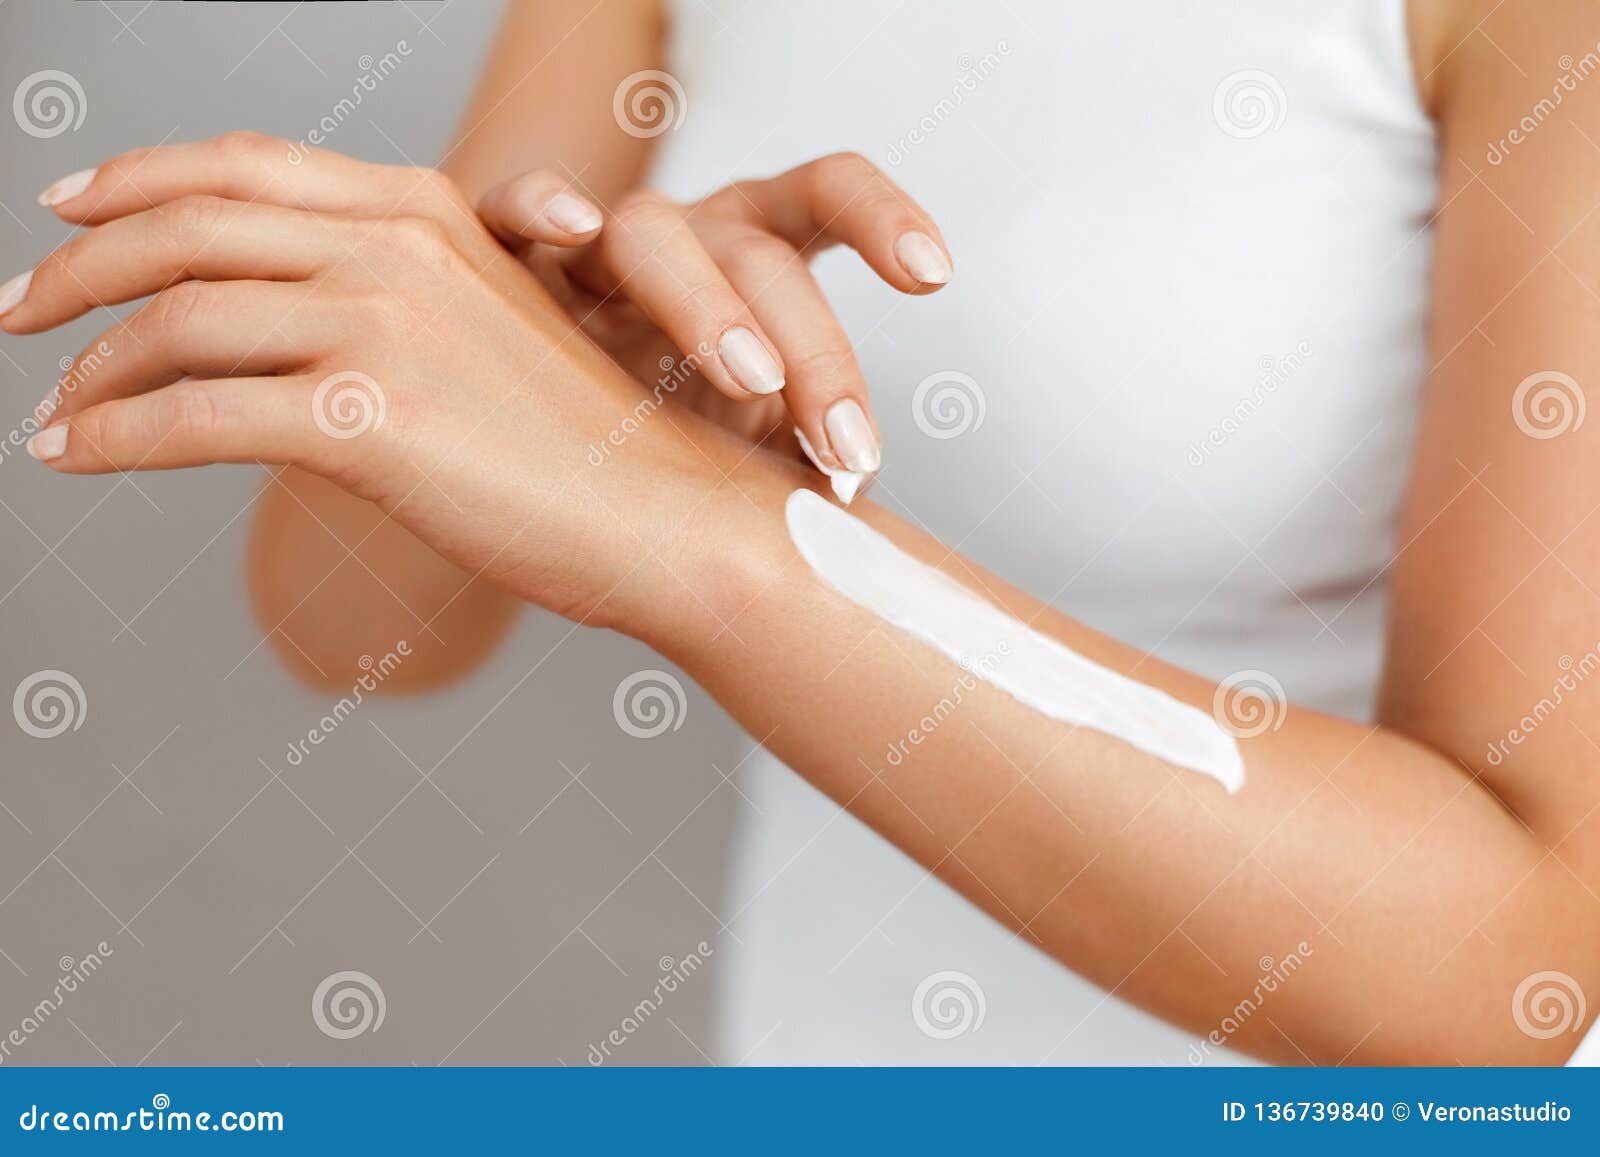 closeup of female hands applying hand cream.hand skin care. women use body lotion on your arms. beauty and body care concept.